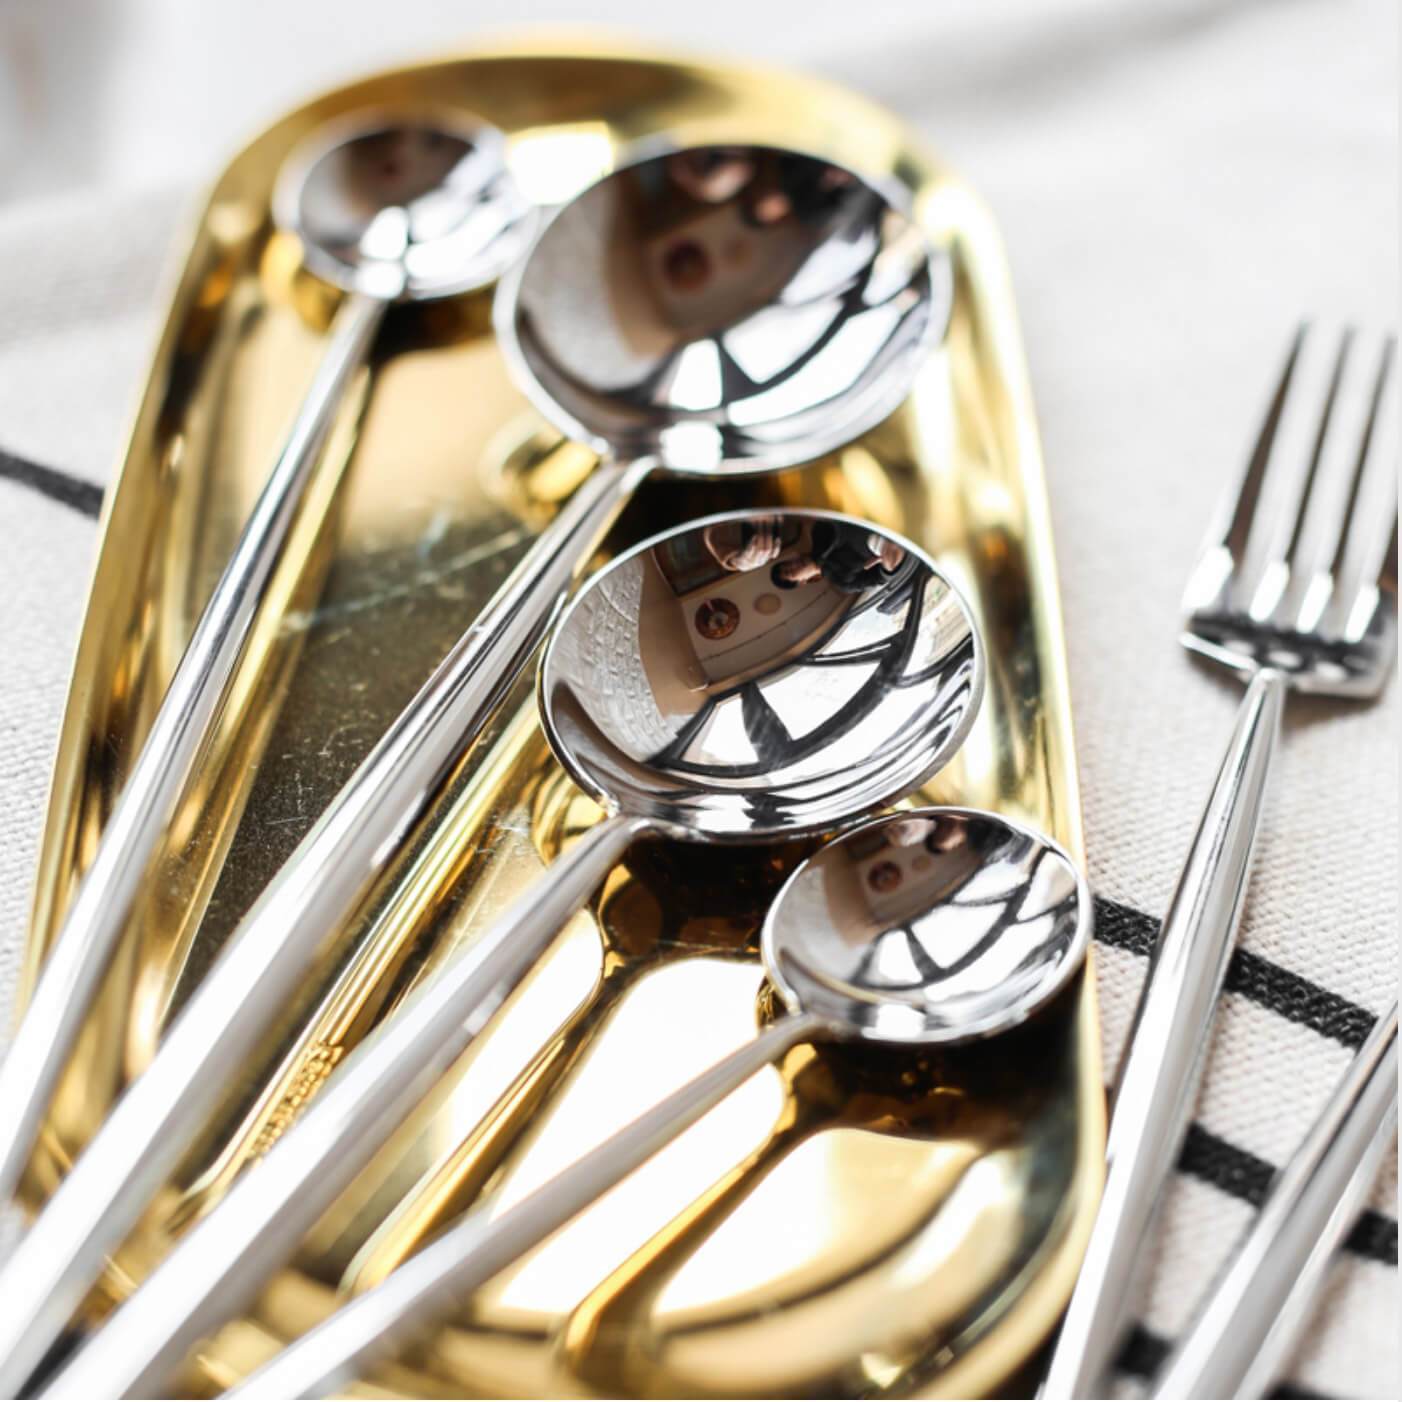 4 Pcs Mirror Surface Silver Cutlery Set - Nordic Side - 